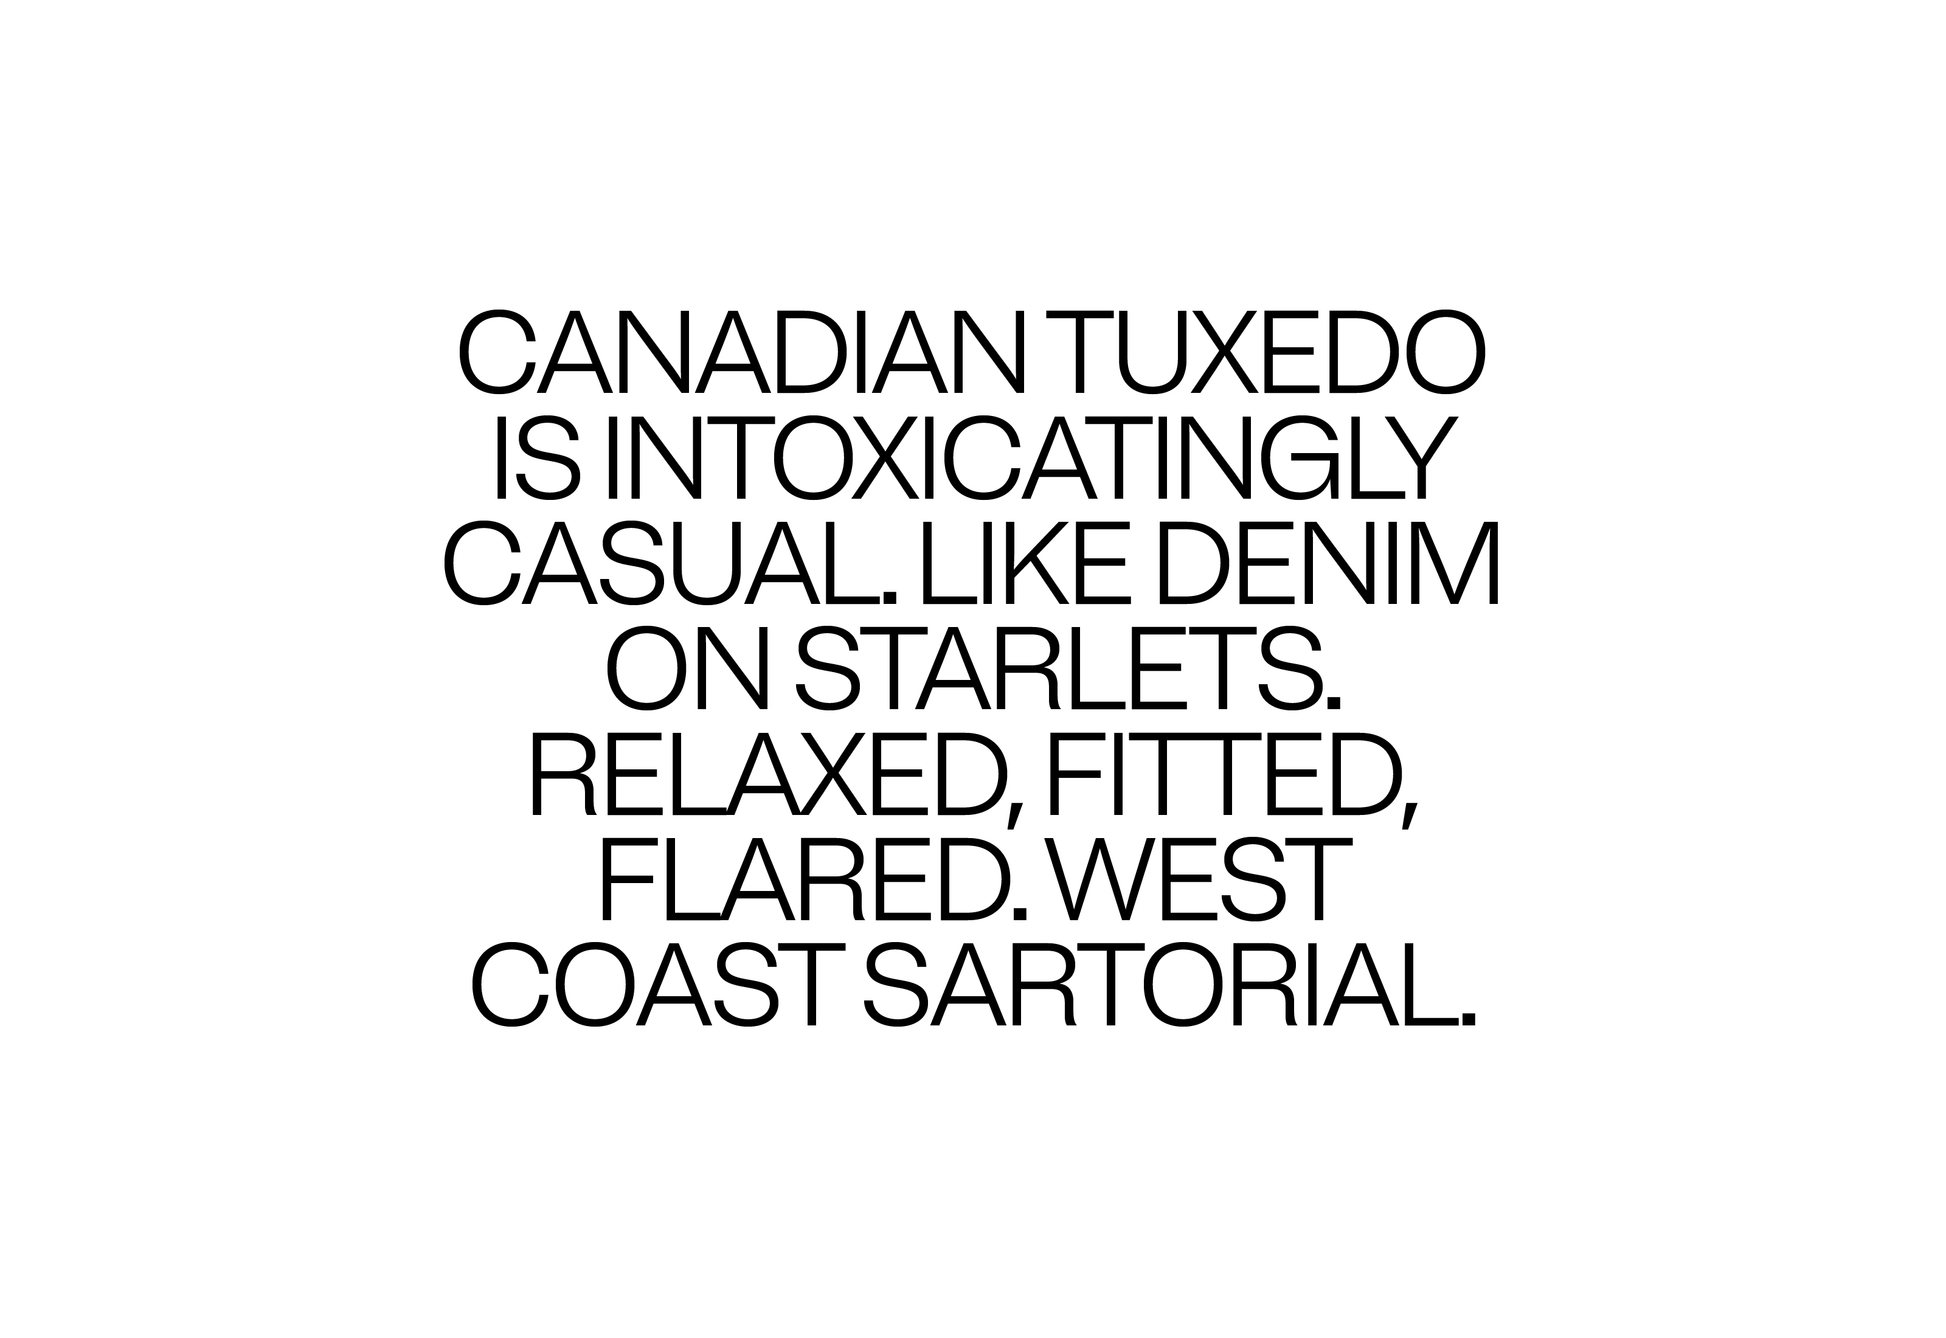 Canadian Tuxedo is intoxicatingly casual. Like denim on starlets. Relaxed, fitted, flared. West Coast satorial.